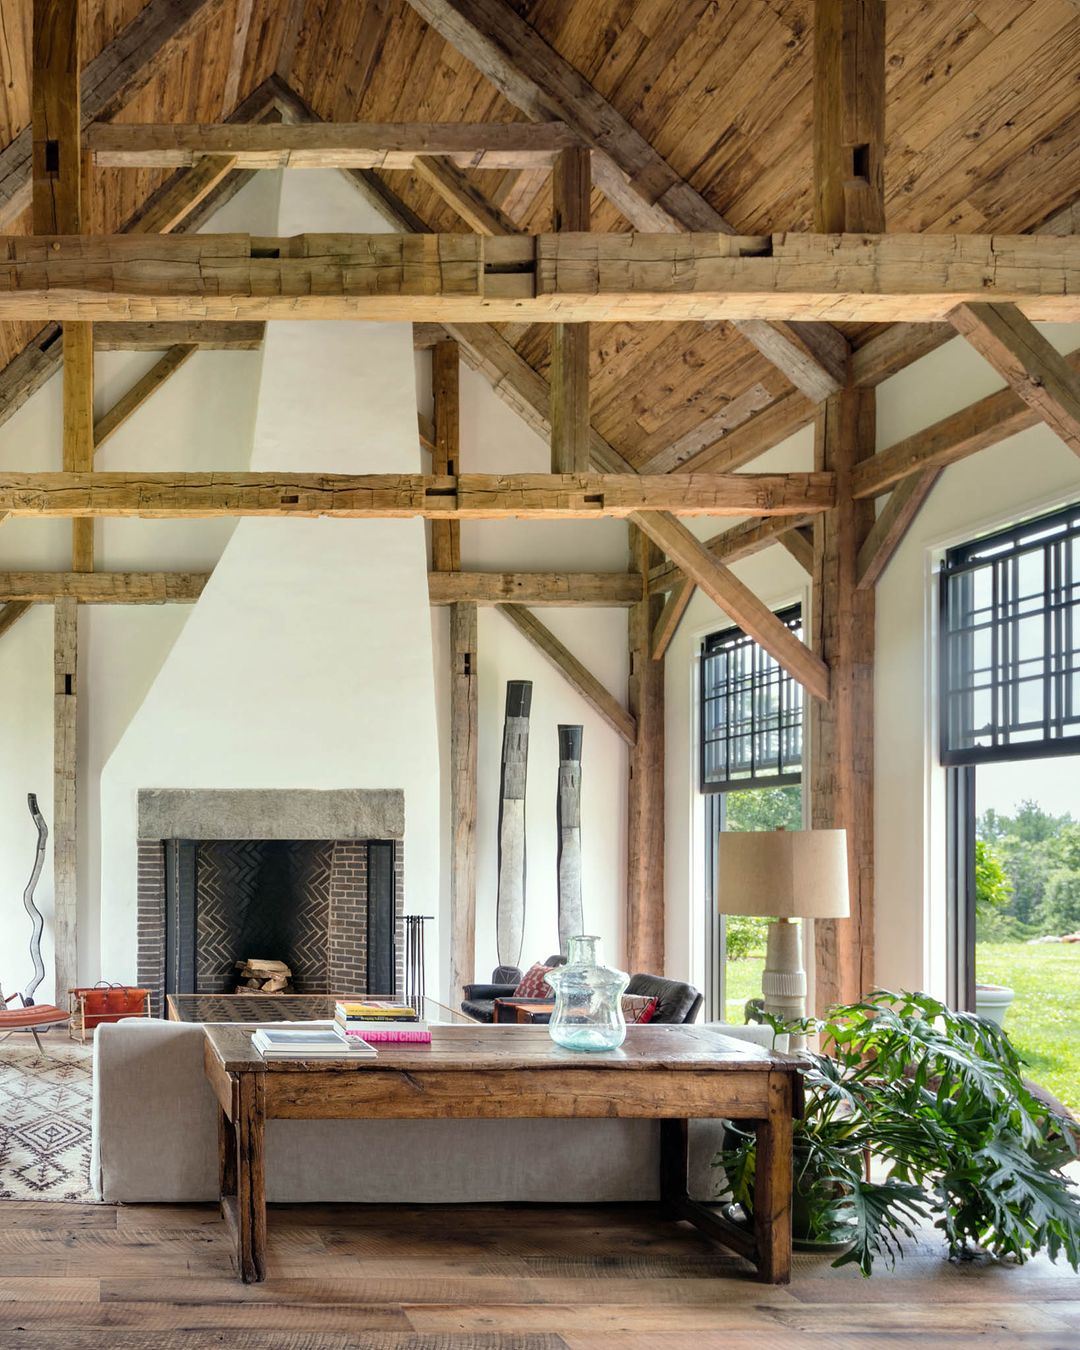 Emphasizing Grandeur with High Ceilings and Exposed Beams